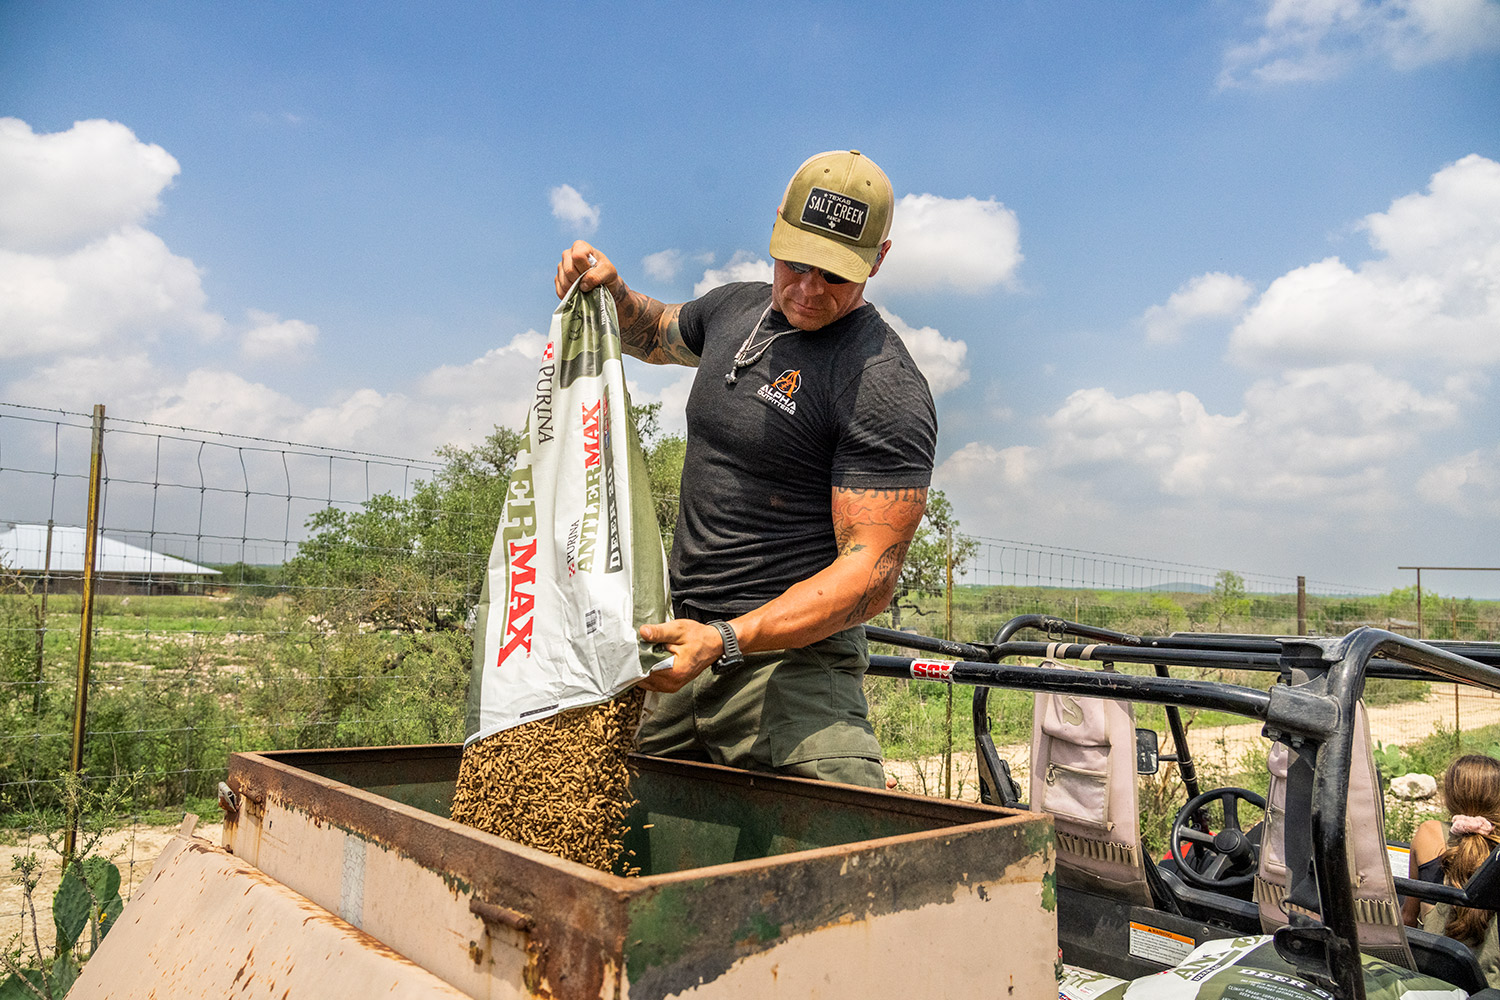 Josh Risner fills a feeder. The ranch goes through roughly 26,000 pounds of protein feed every two to three weeks.